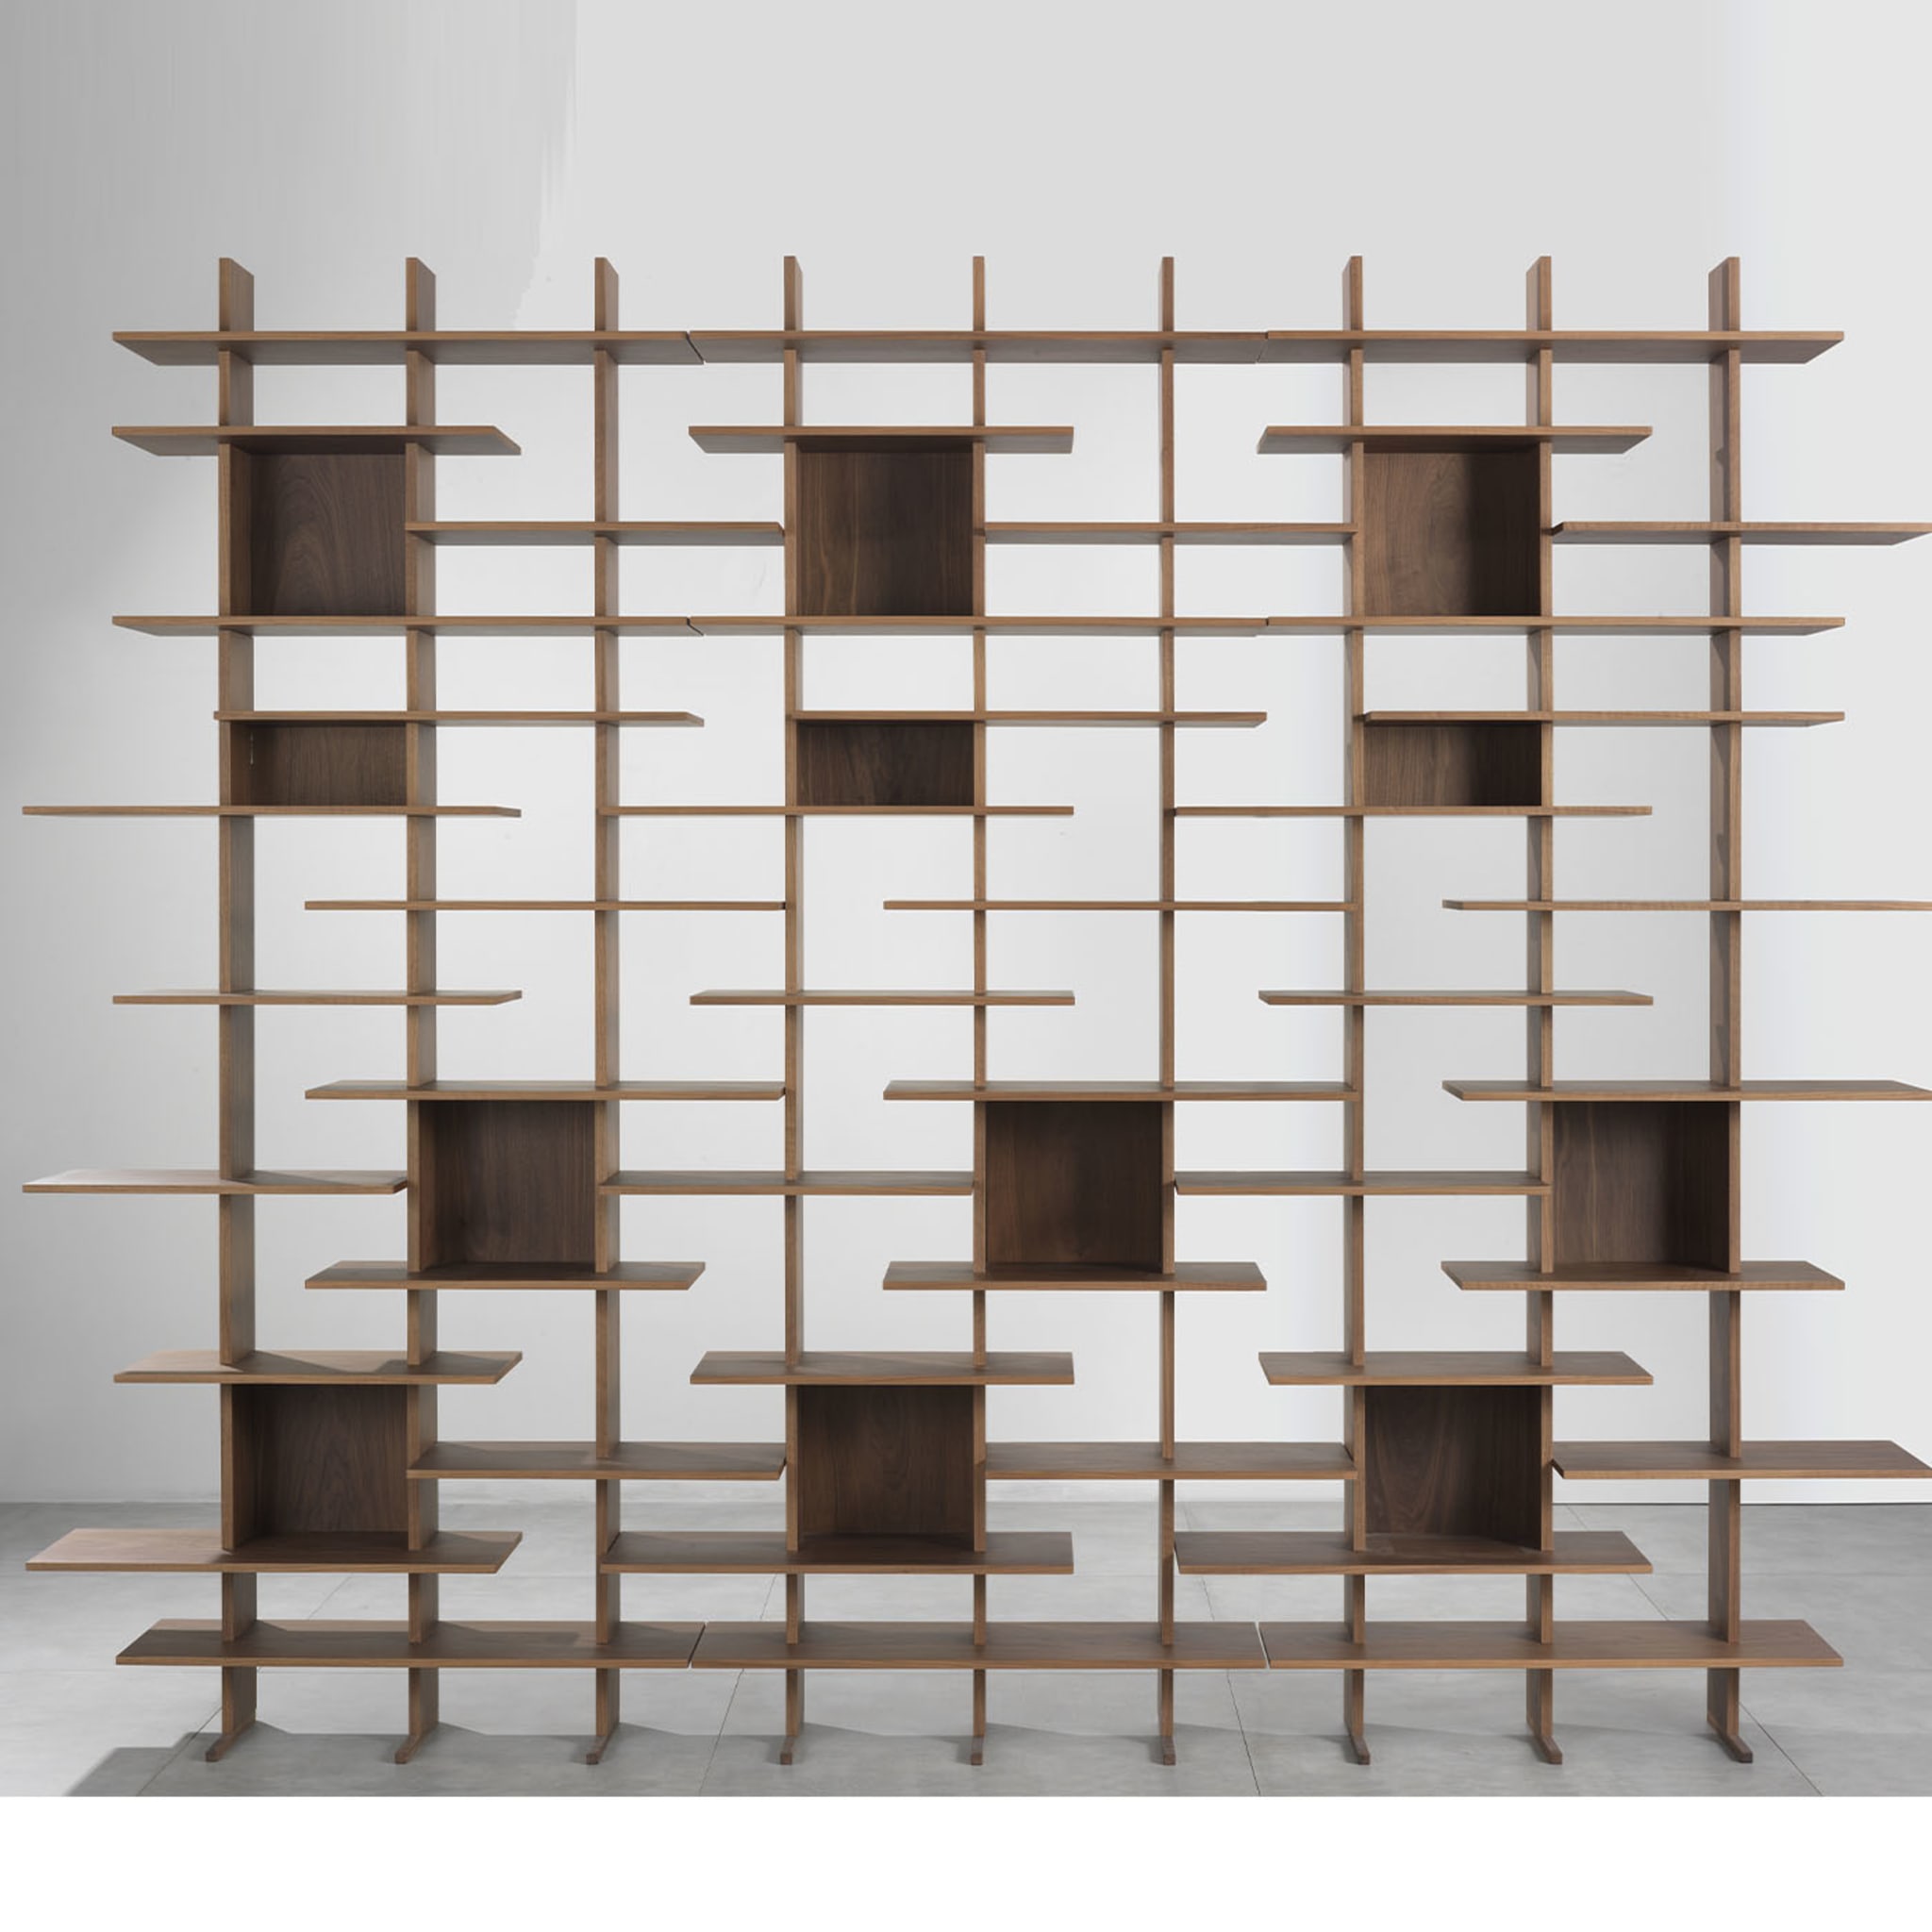 Elisabeth Bookcase #3 by Cesare Arosio and Beatrice Fanchini - Alternative view 2